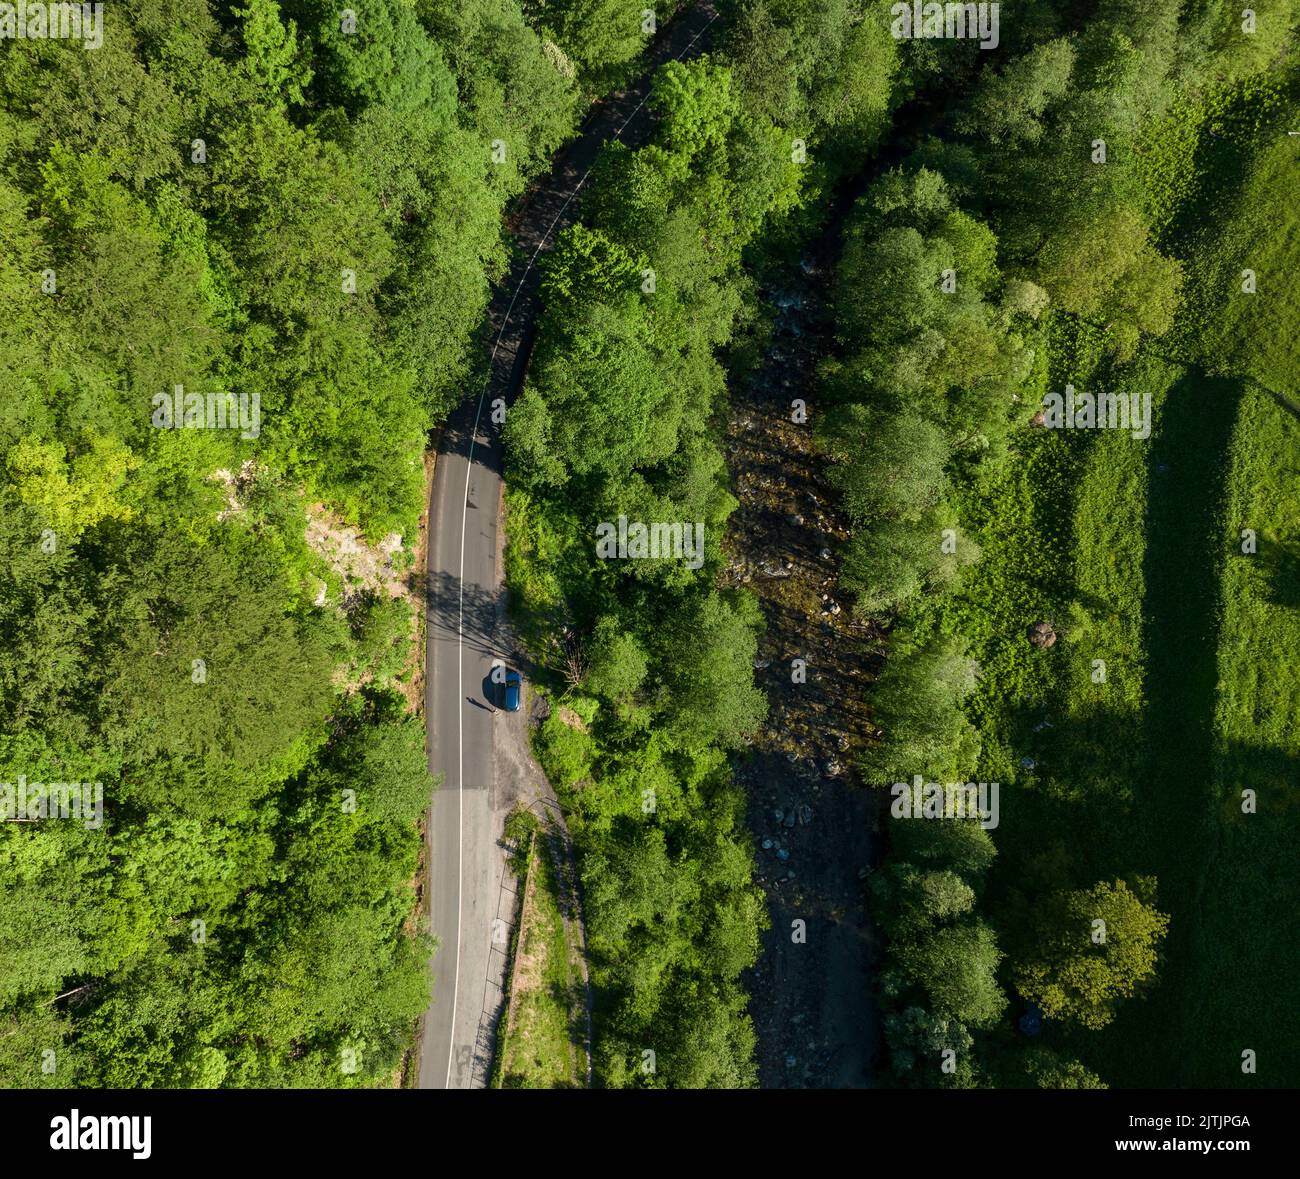 Looking down the road and river - Perspective from drone Stock Photo